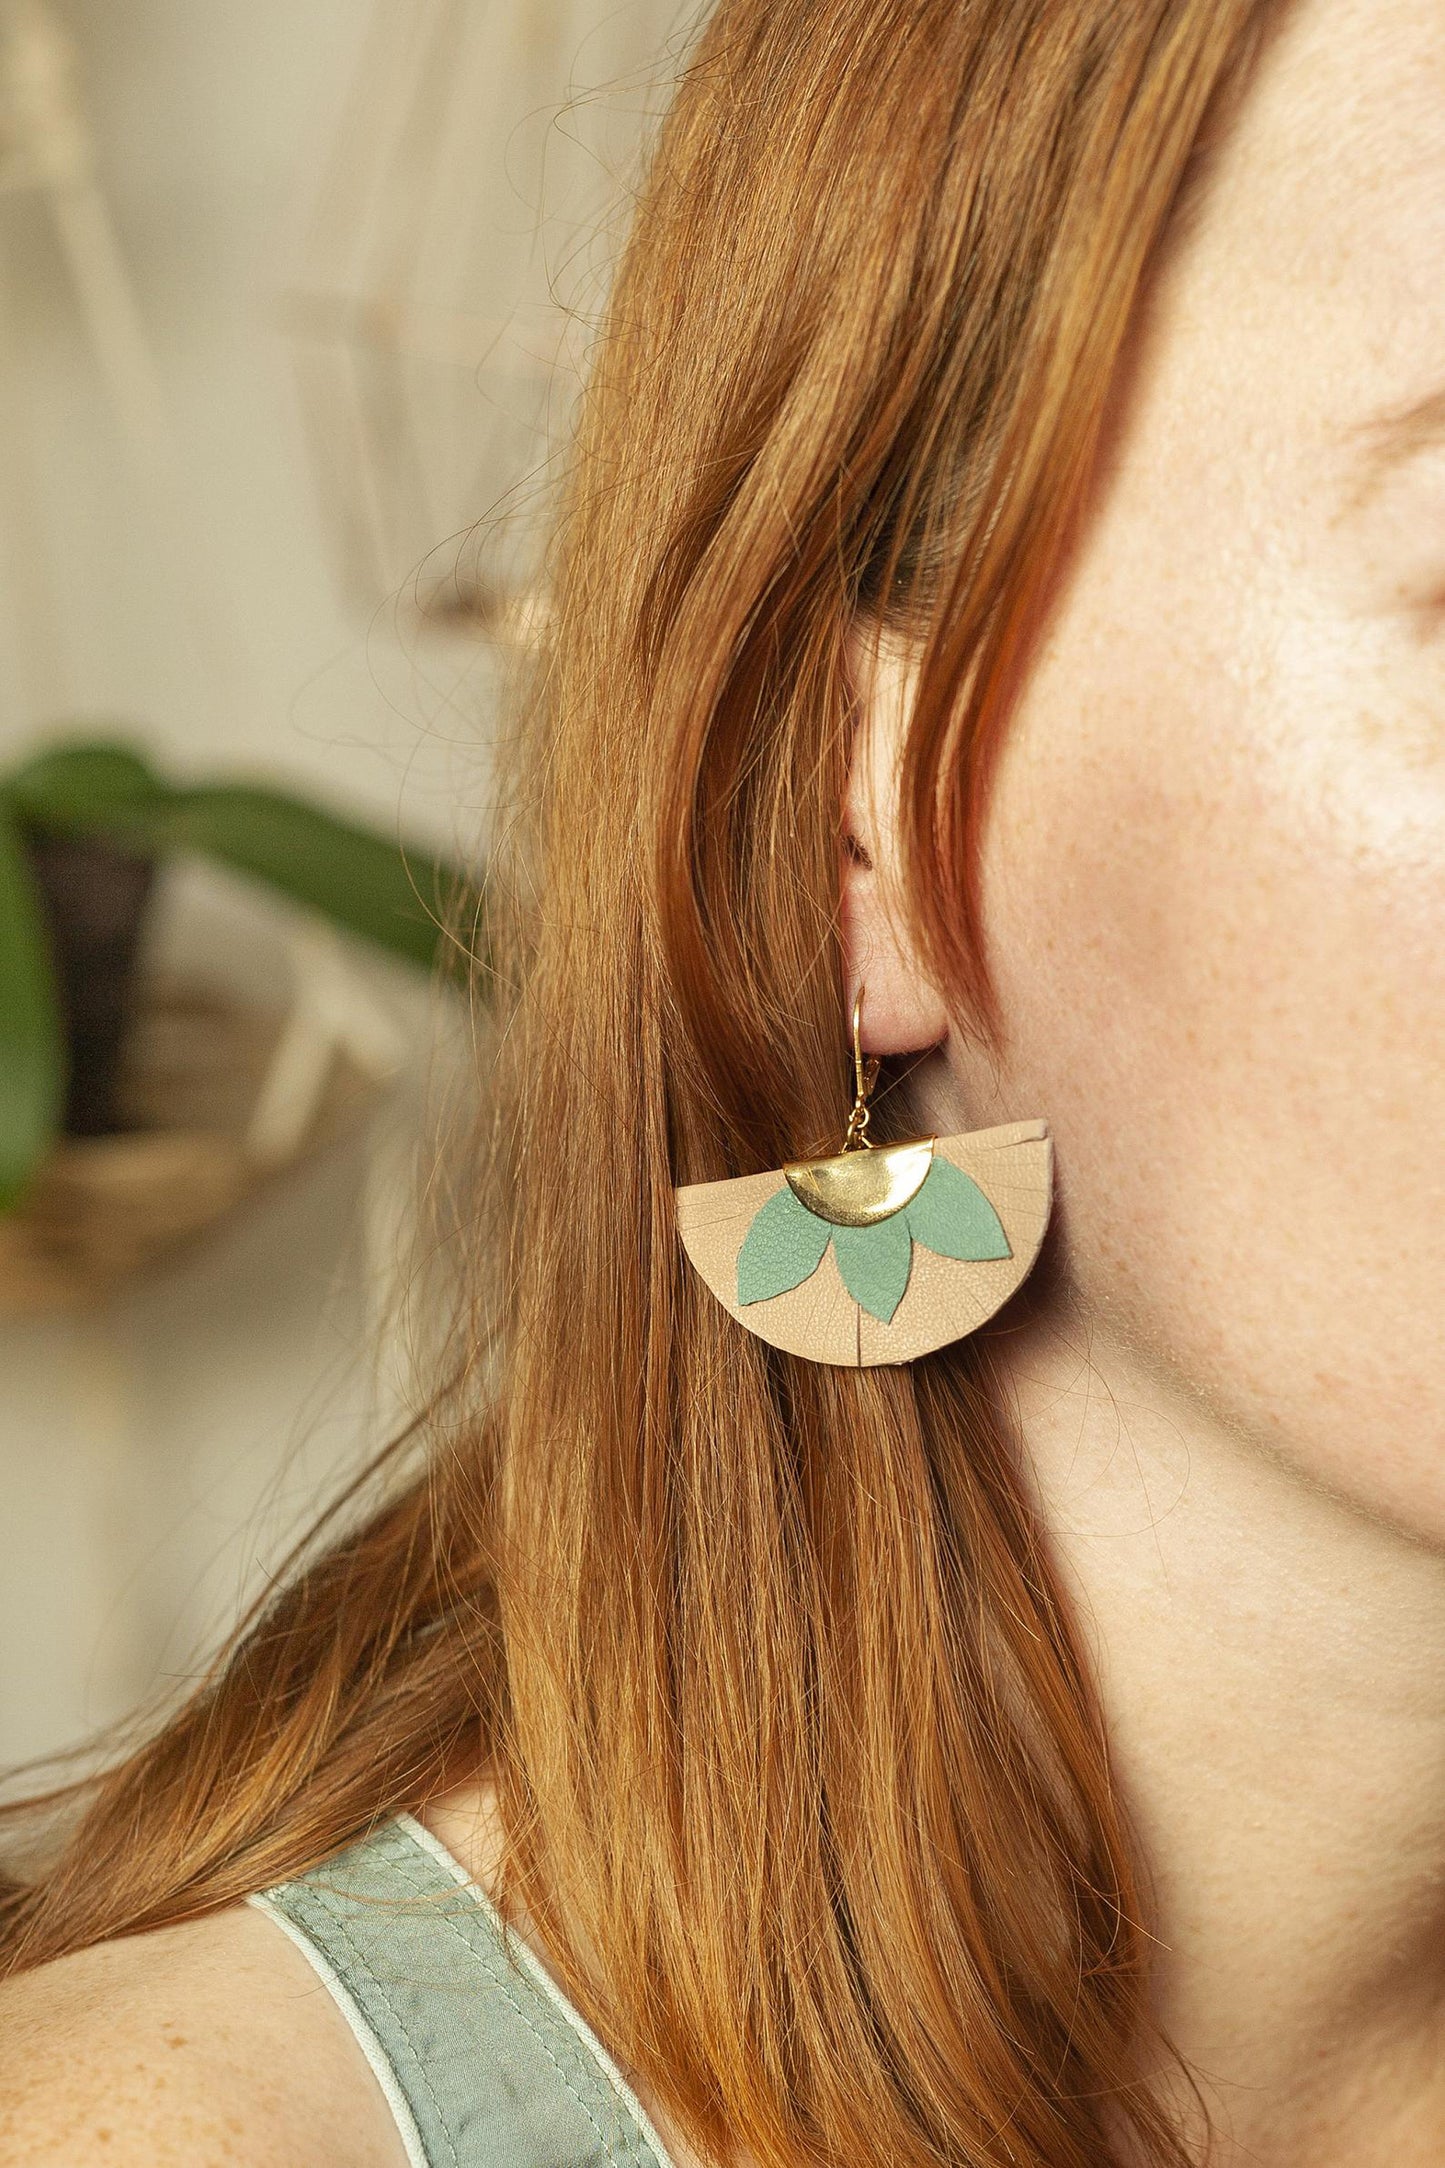 Semicircle earrings in yellow and green leather